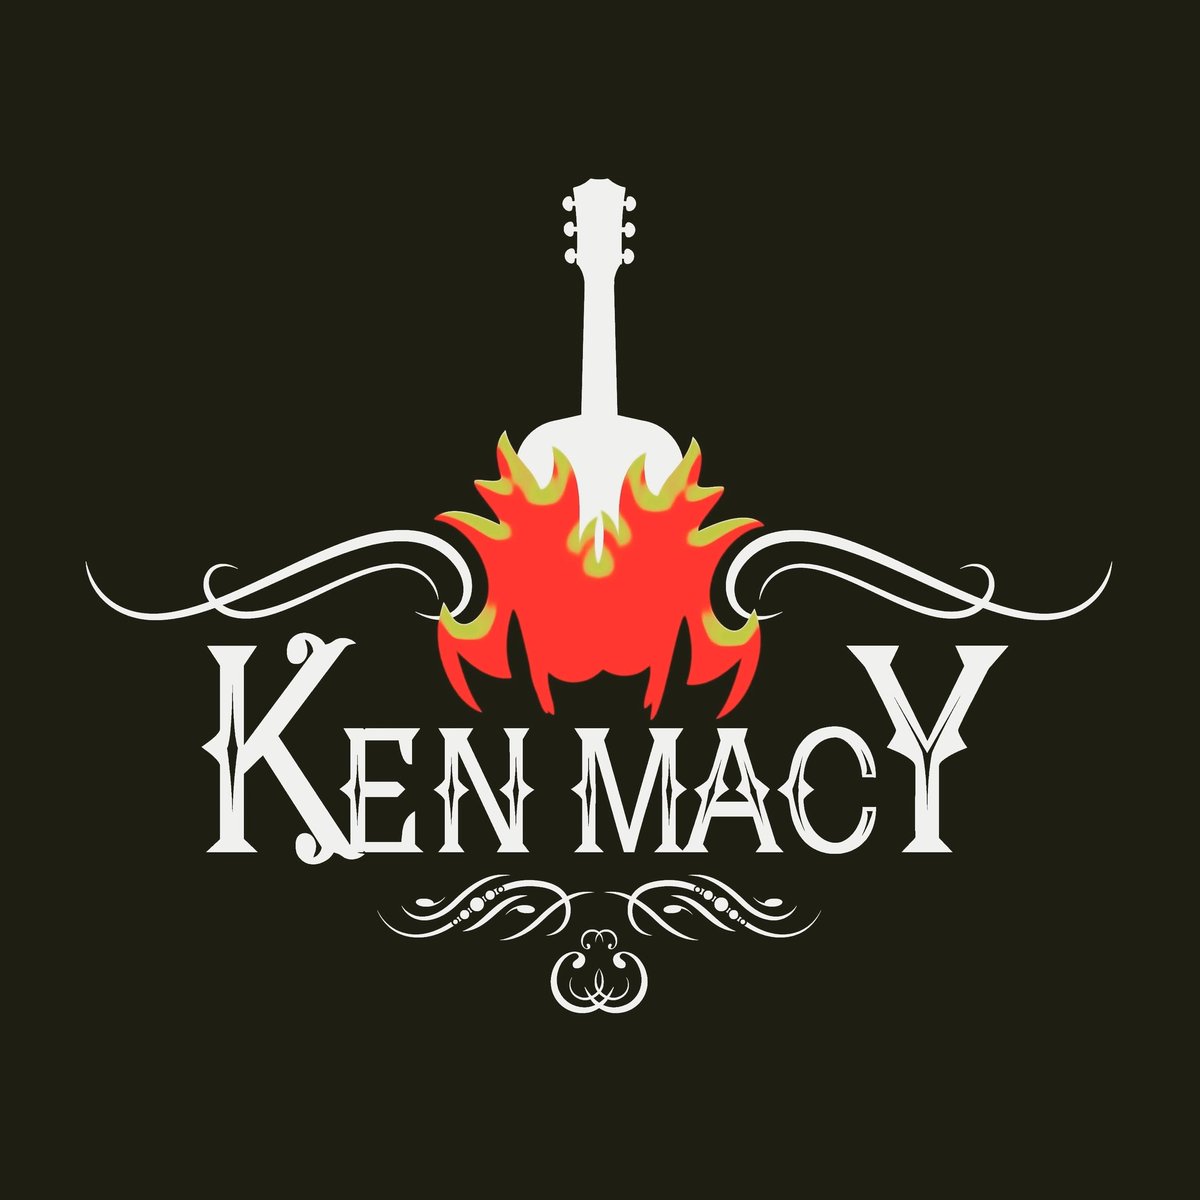 Tonight! Last show until after Christmas! Wicked Cantina Bradenton Beach ⛱️ FL 6pm-9pm! Happy holidays all! @kenmacymusic #HappyHolidays #MerryChristmas